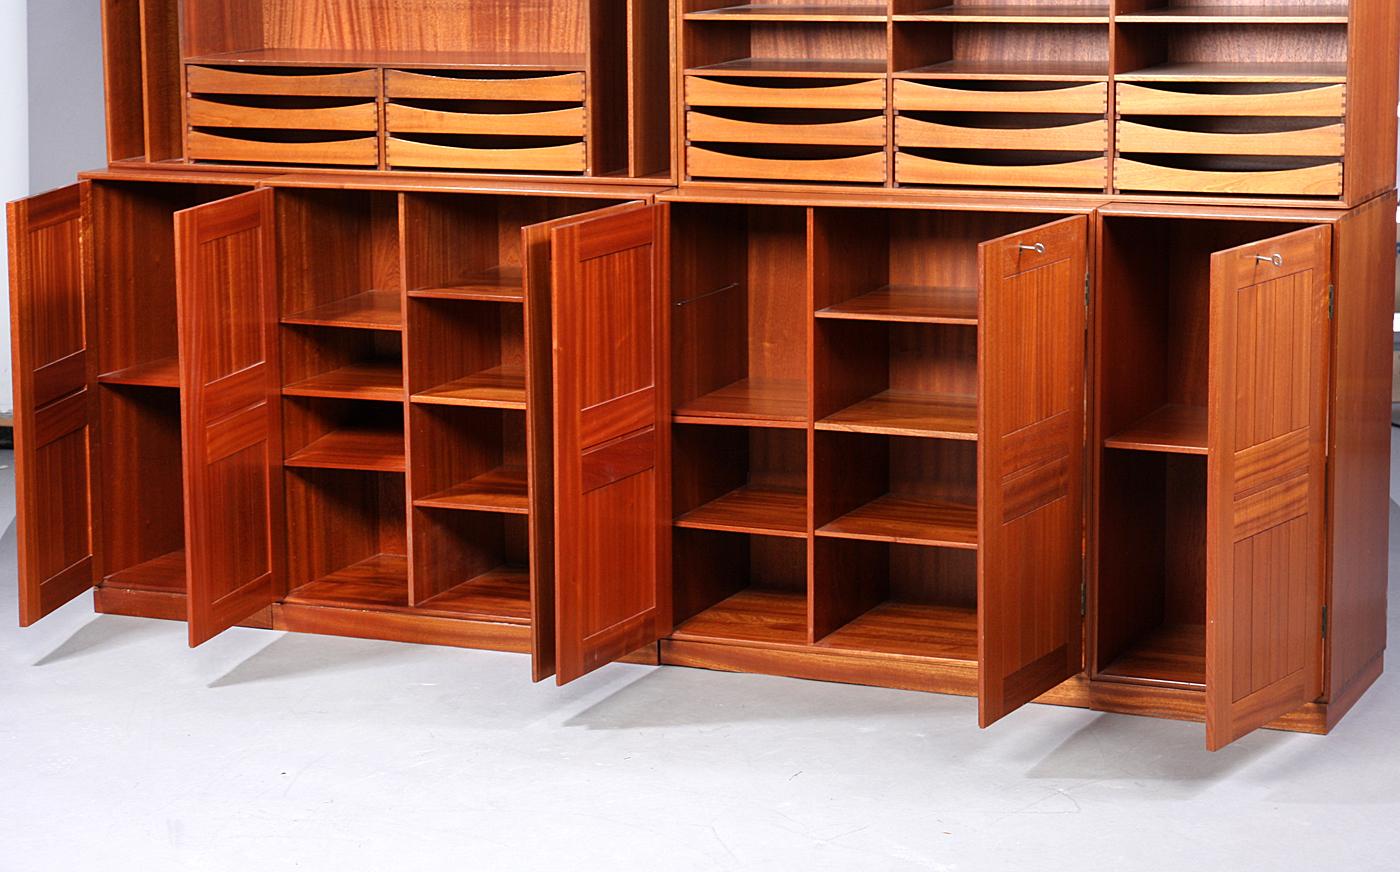 Mogens Koch, 1898-1992. Shelf wall in the form of six shelving modules and four mahogany bases, best. Of two modules, each with two doors, H. 76, B. 76, D. 36 cm. 2 modules with door H. 76, B. 38, D. 36 cm. two modules with pull-out trays, shelves